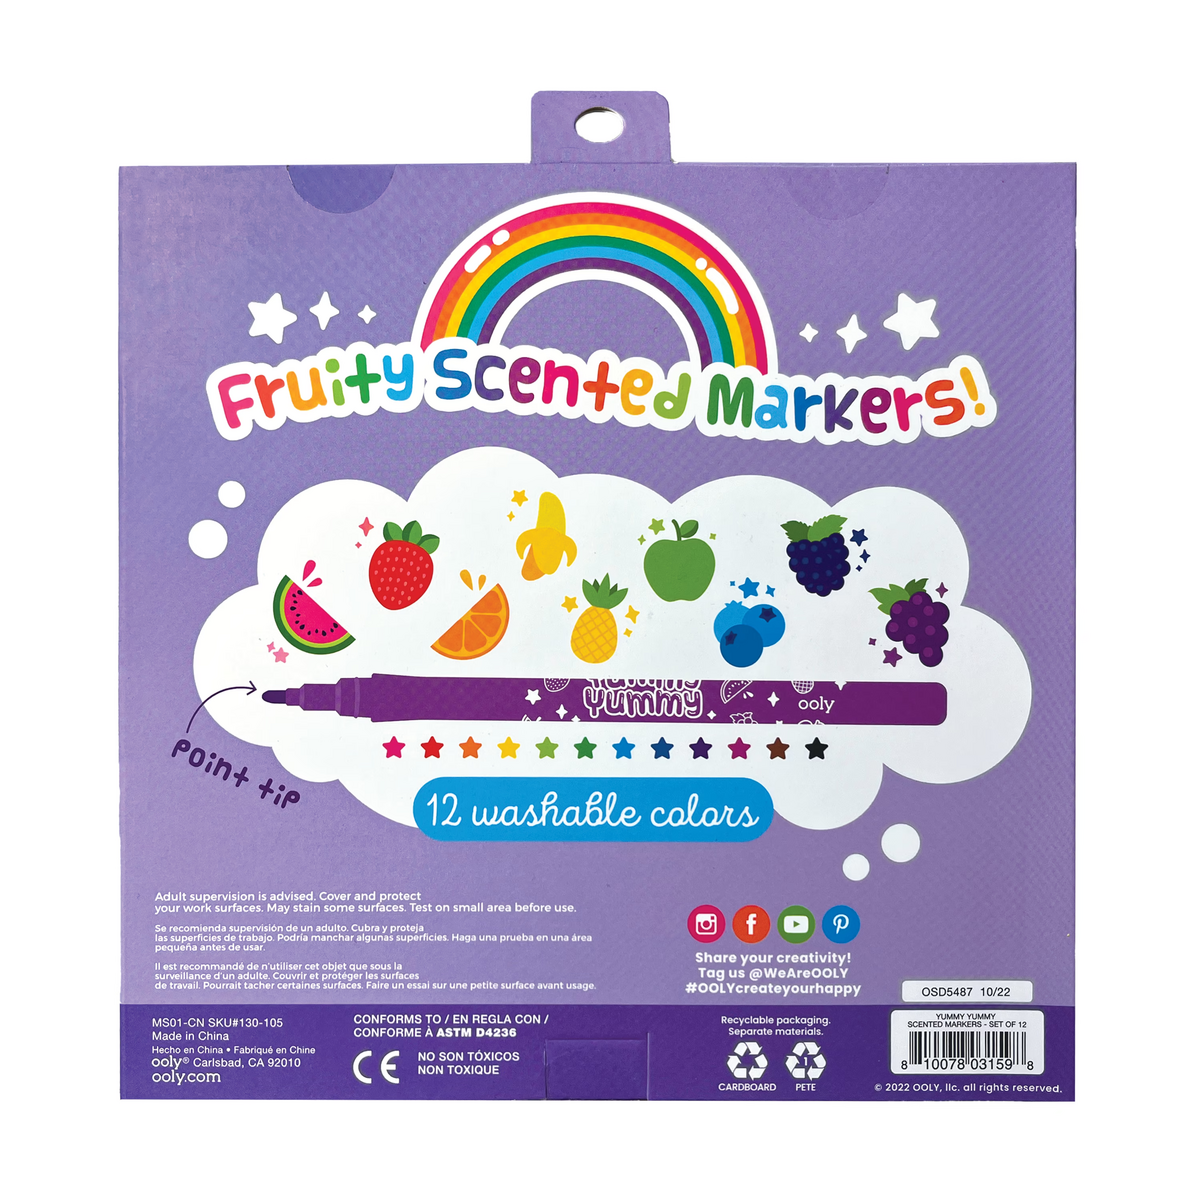 Yummy Yummy Scented Markers - Tiddlywinks Toys And Games